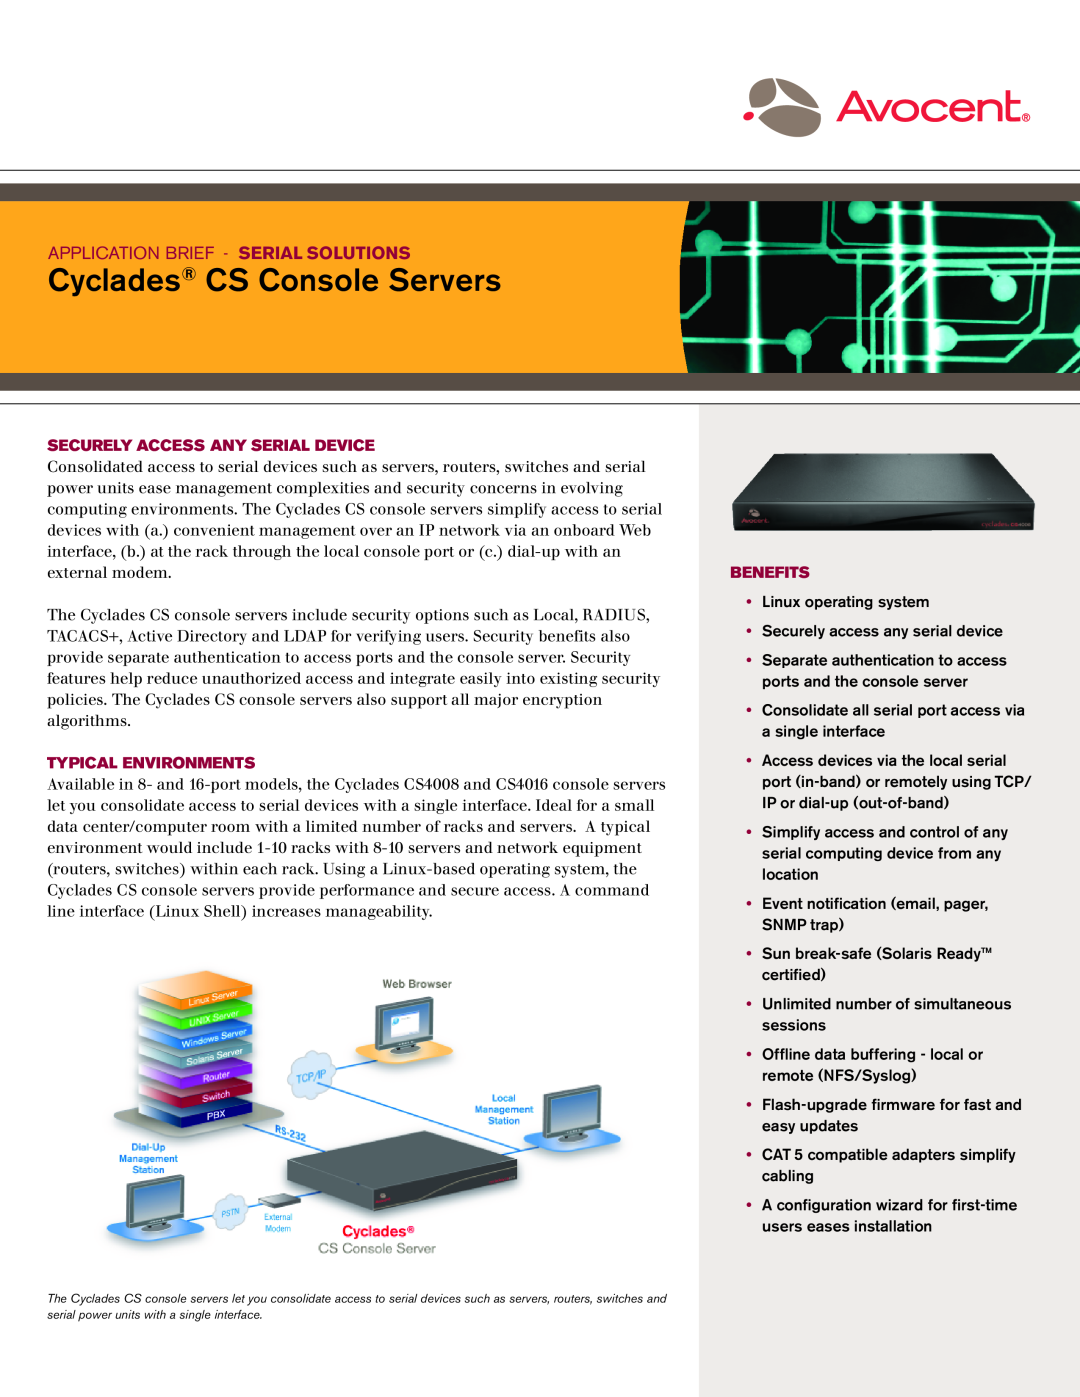 Avocent CCS4016-001 manual Cyclades CS Console Servers, Application Brief - Serial Solutions, Typical Environments 